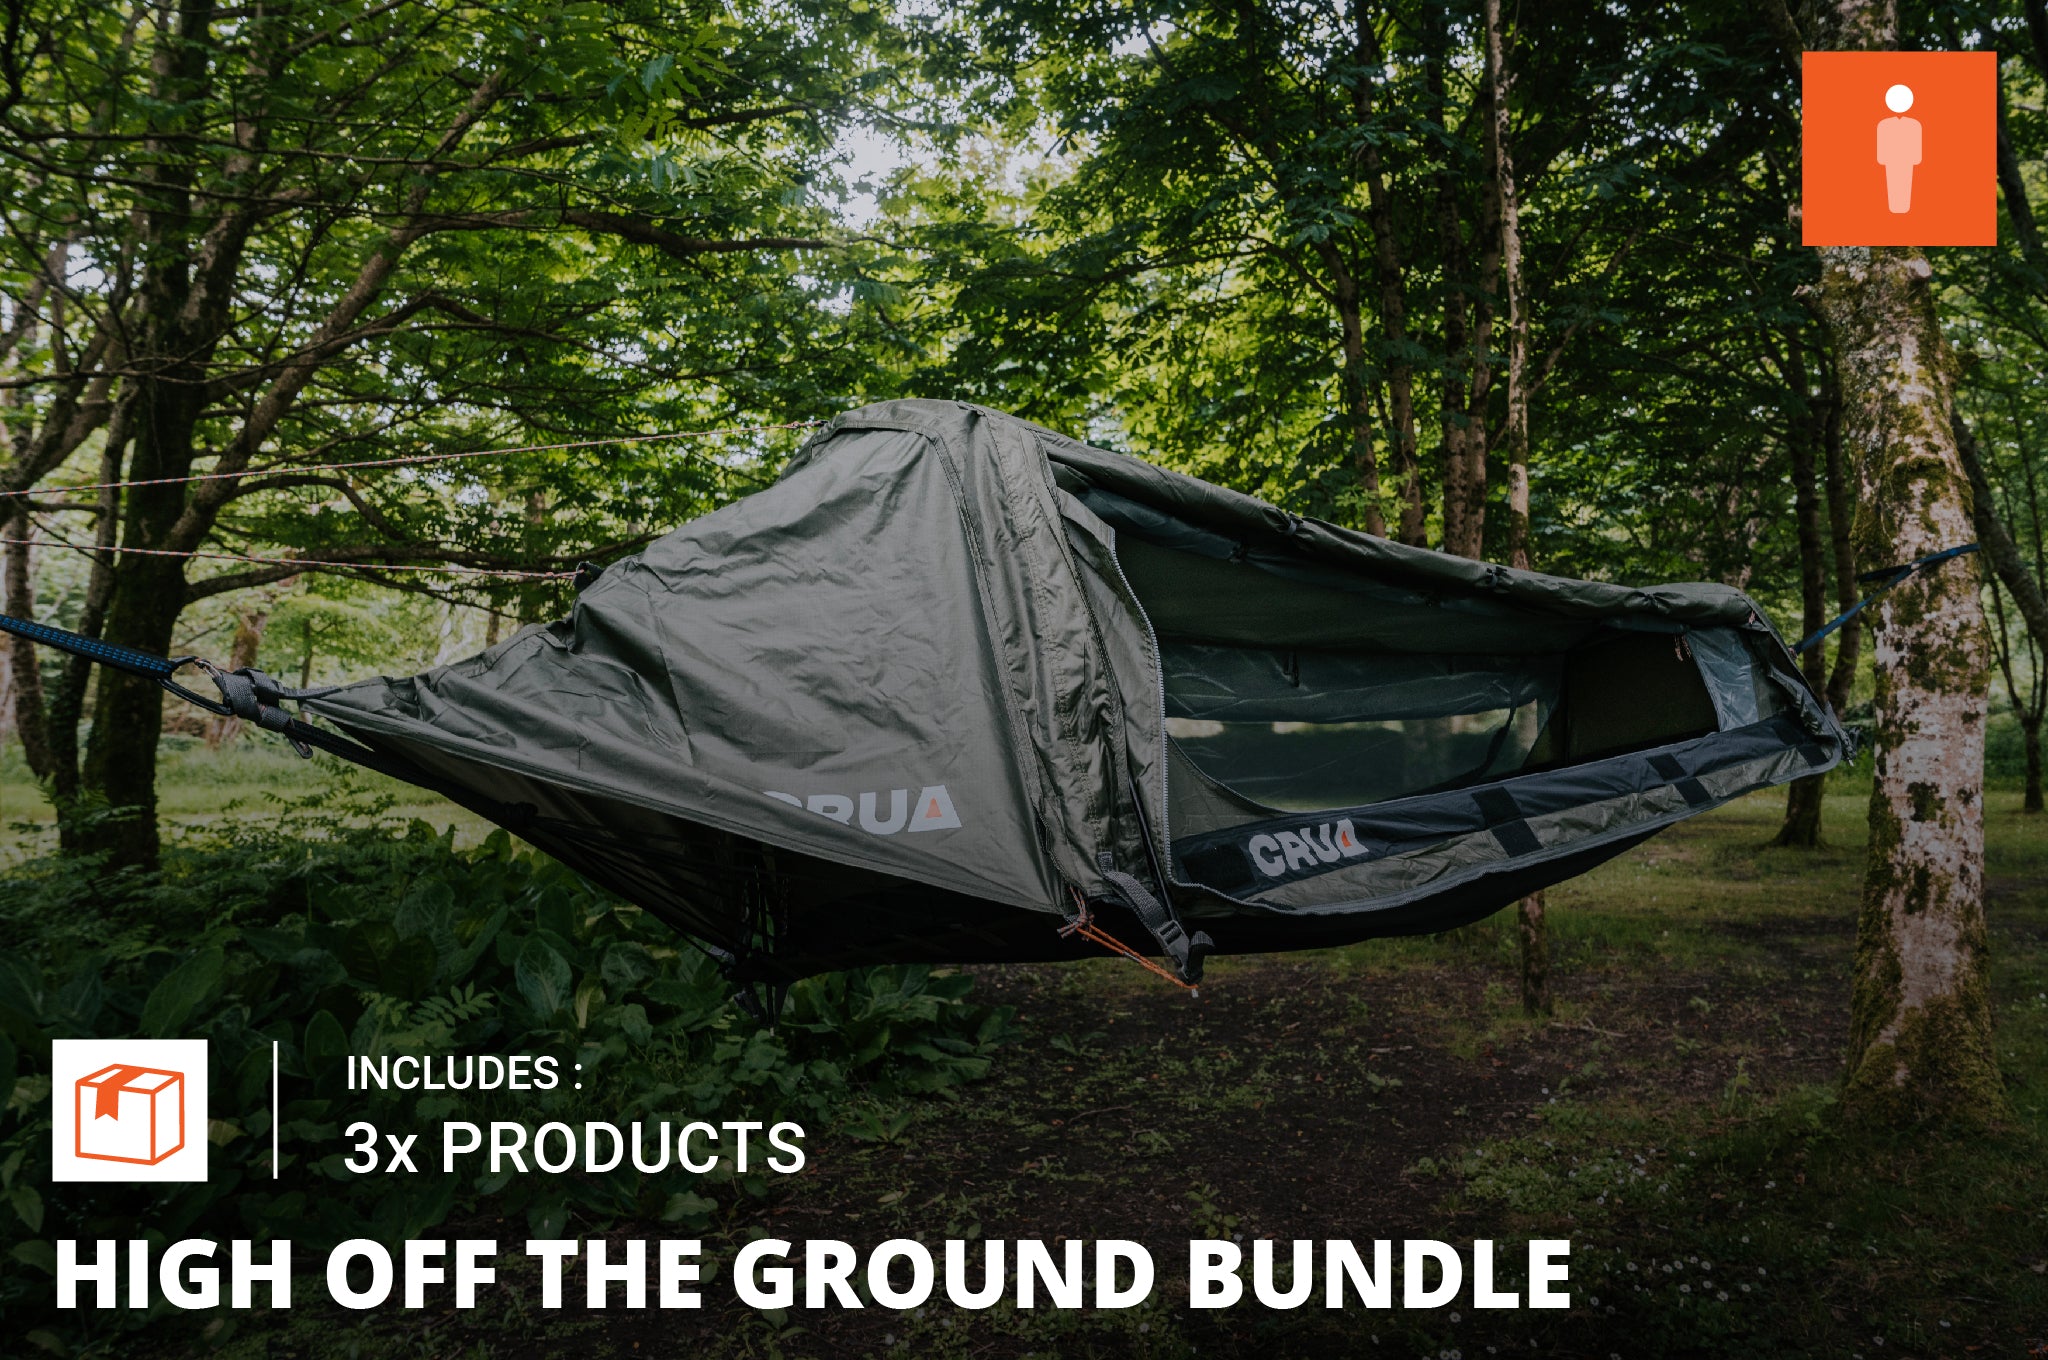 HIGH OFF THE GROUND BUNDLE | 1 PERSON